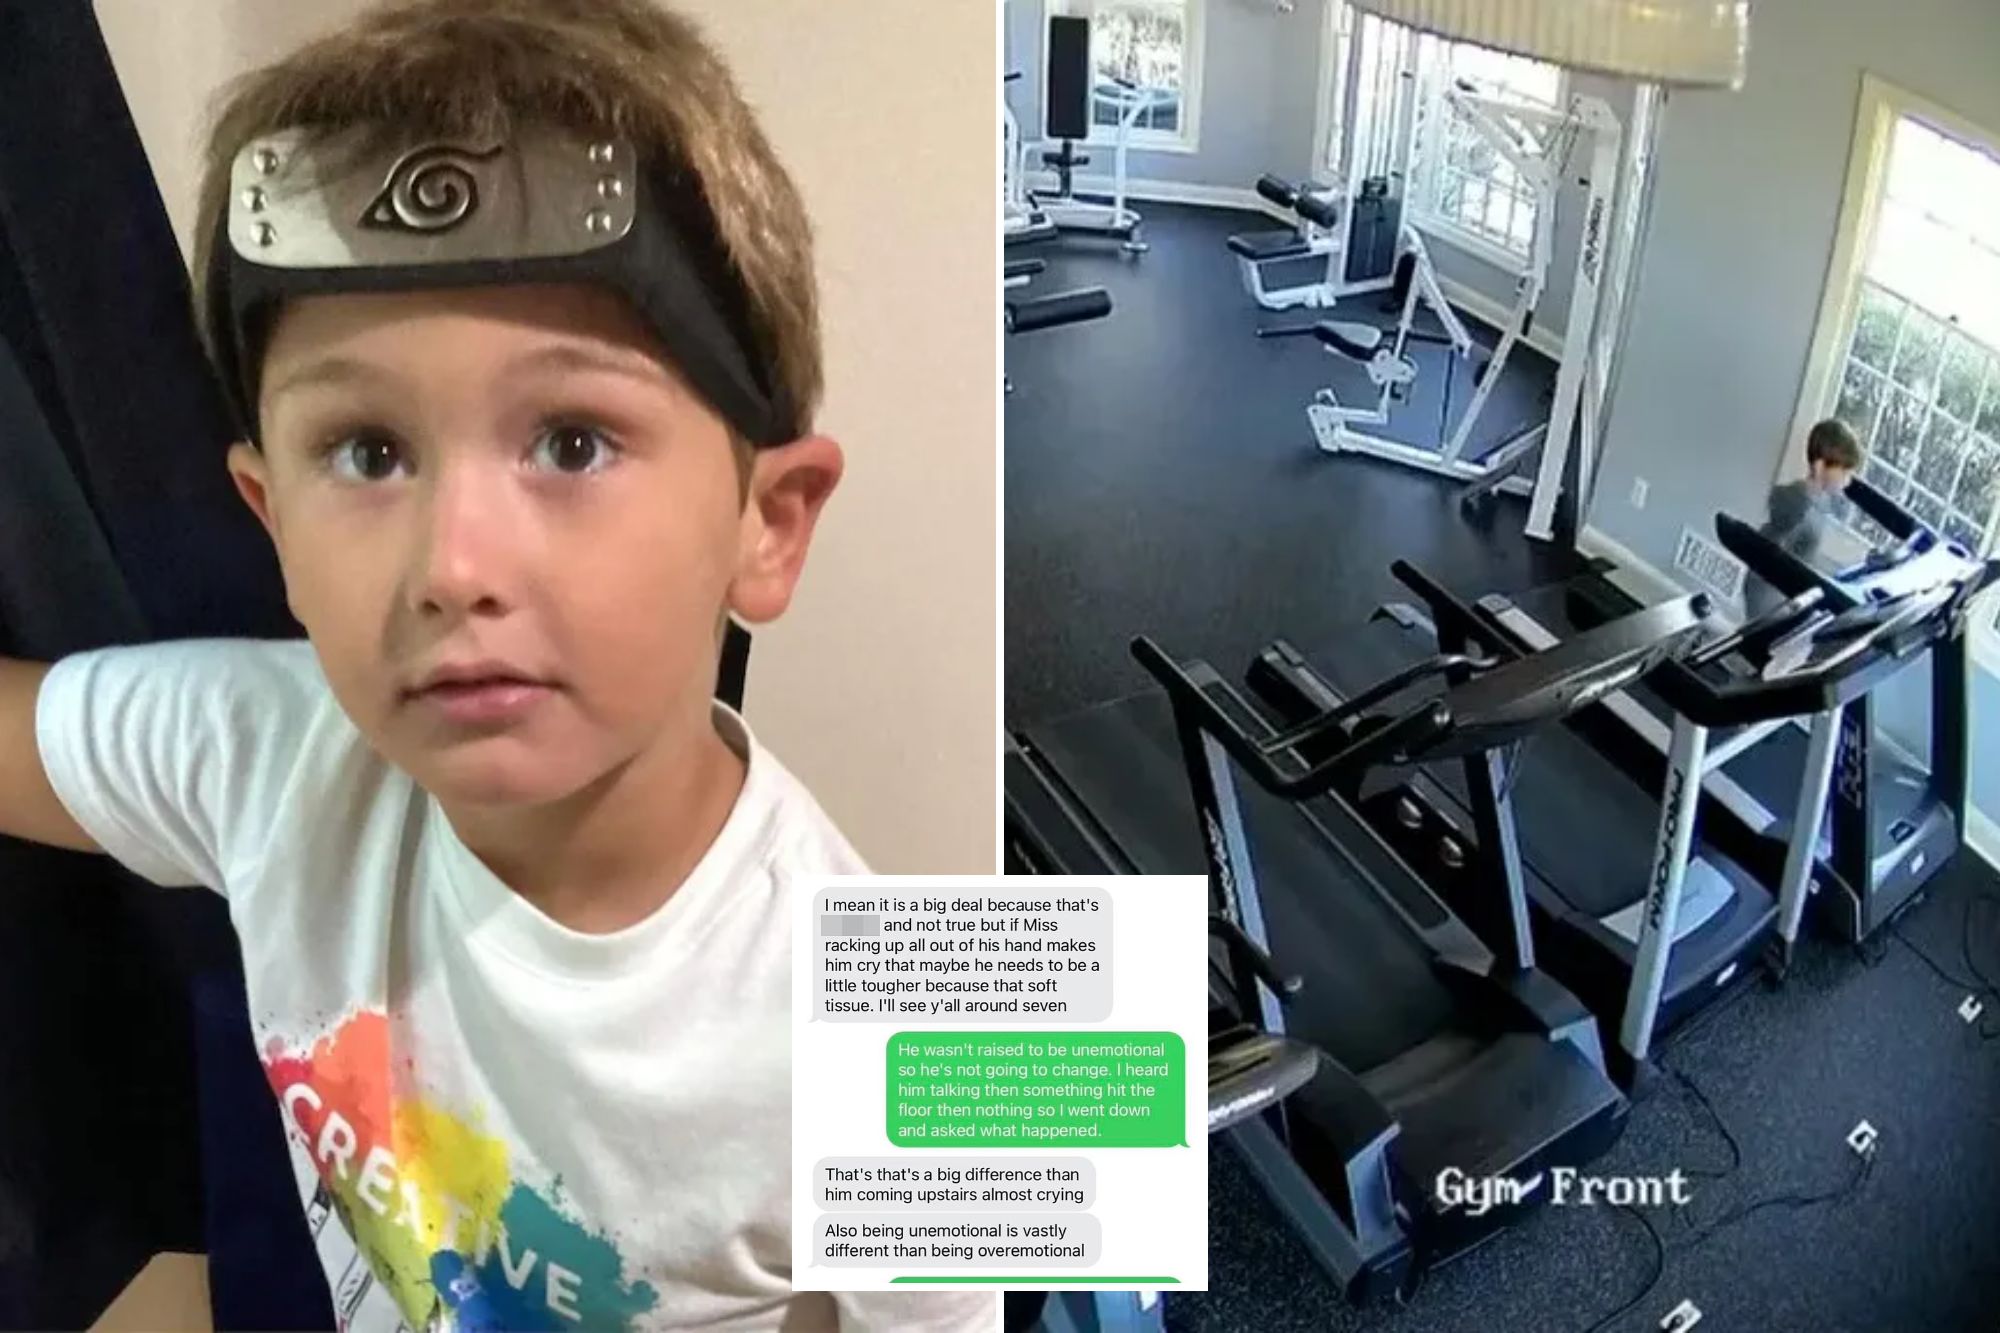 Chilling texts of 'killer' dad who made son run on treadmill days before death